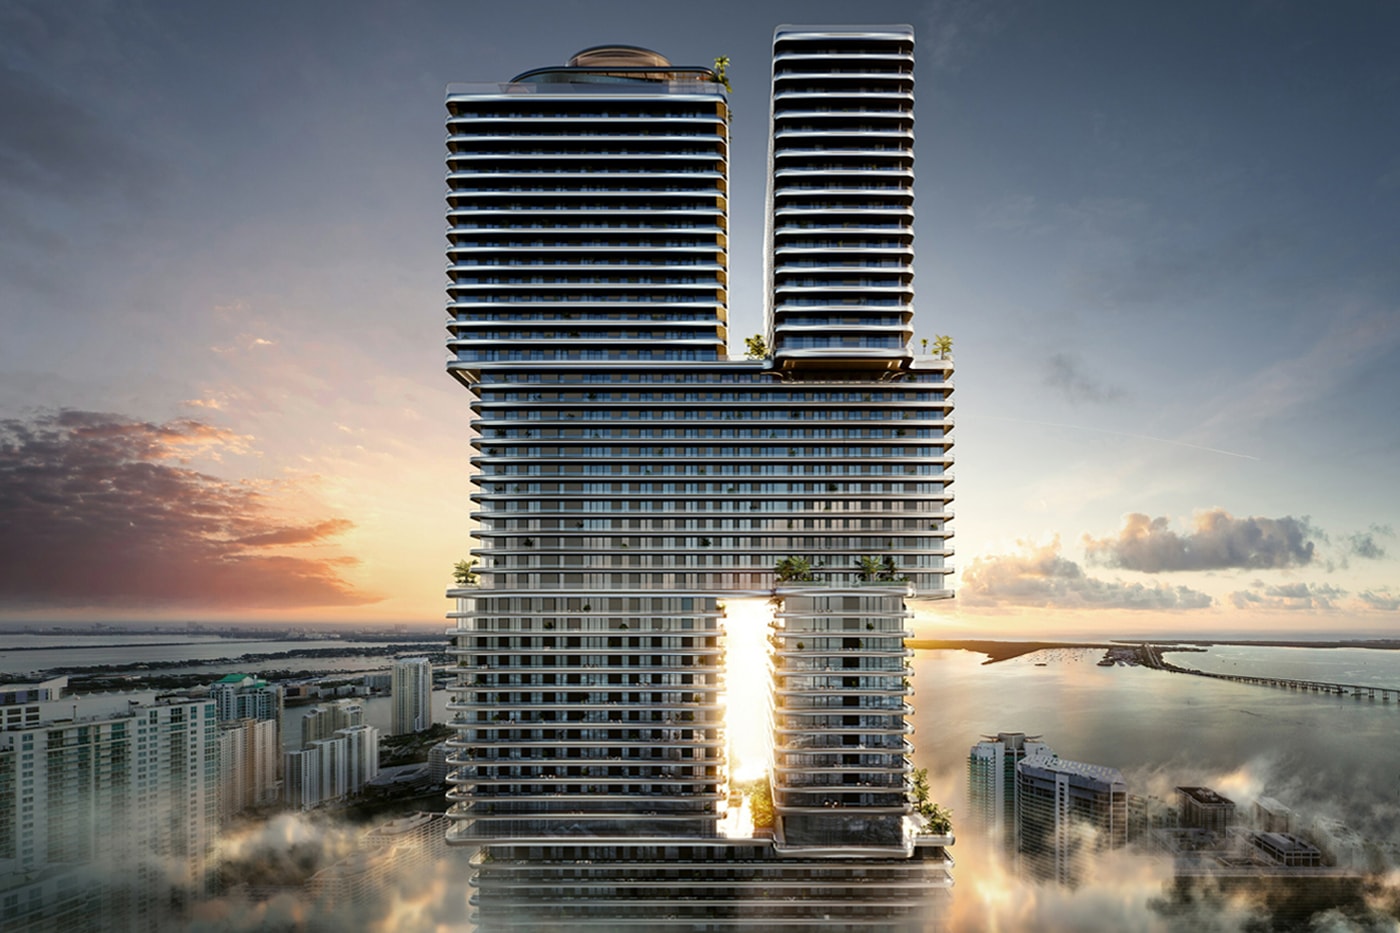 First U.S. Mercedes-Benz Tower Is Coming to Miami mercedes benz places 67 story mixed used building brickell 2027 opening